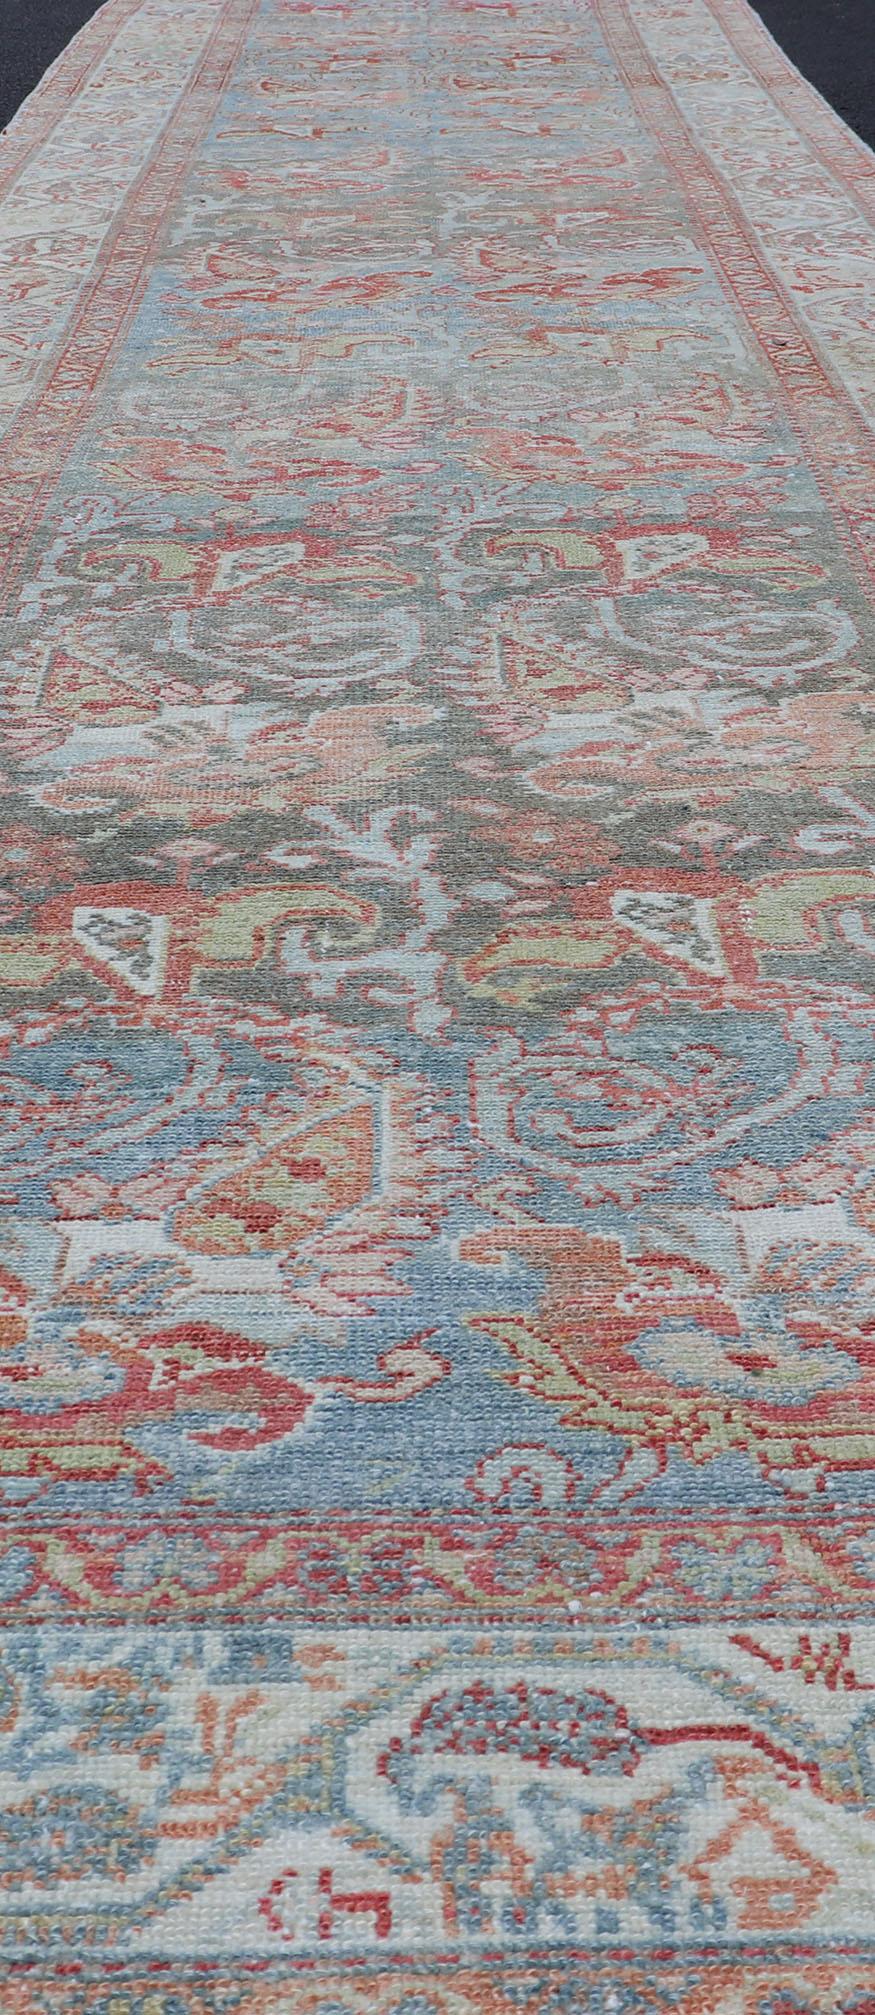 Fine Antique Persian Malayer Runner in Soft Tones of Blue, Red, Brown and Cream For Sale 1